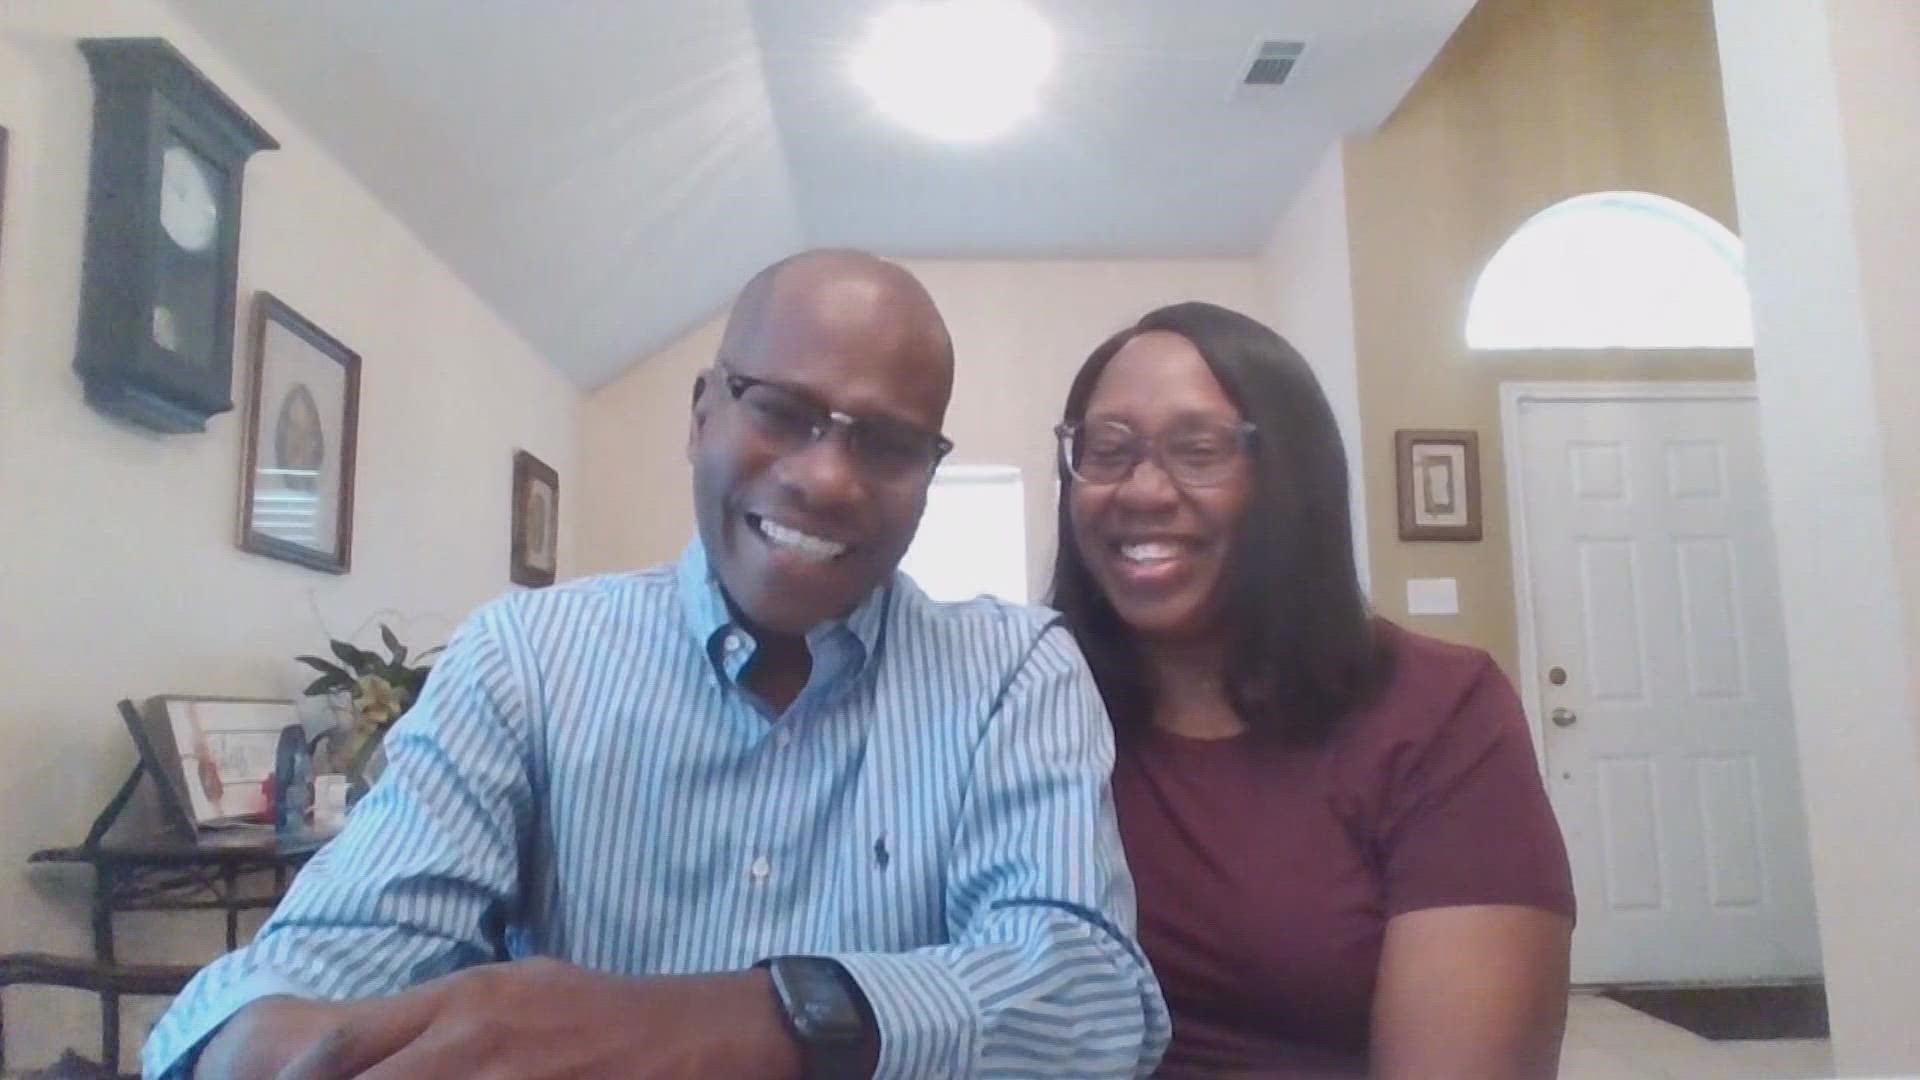 Michael and his wife Sherry thought they were meeting for a regular family Zoom call, when his daughter revealed a surprise!